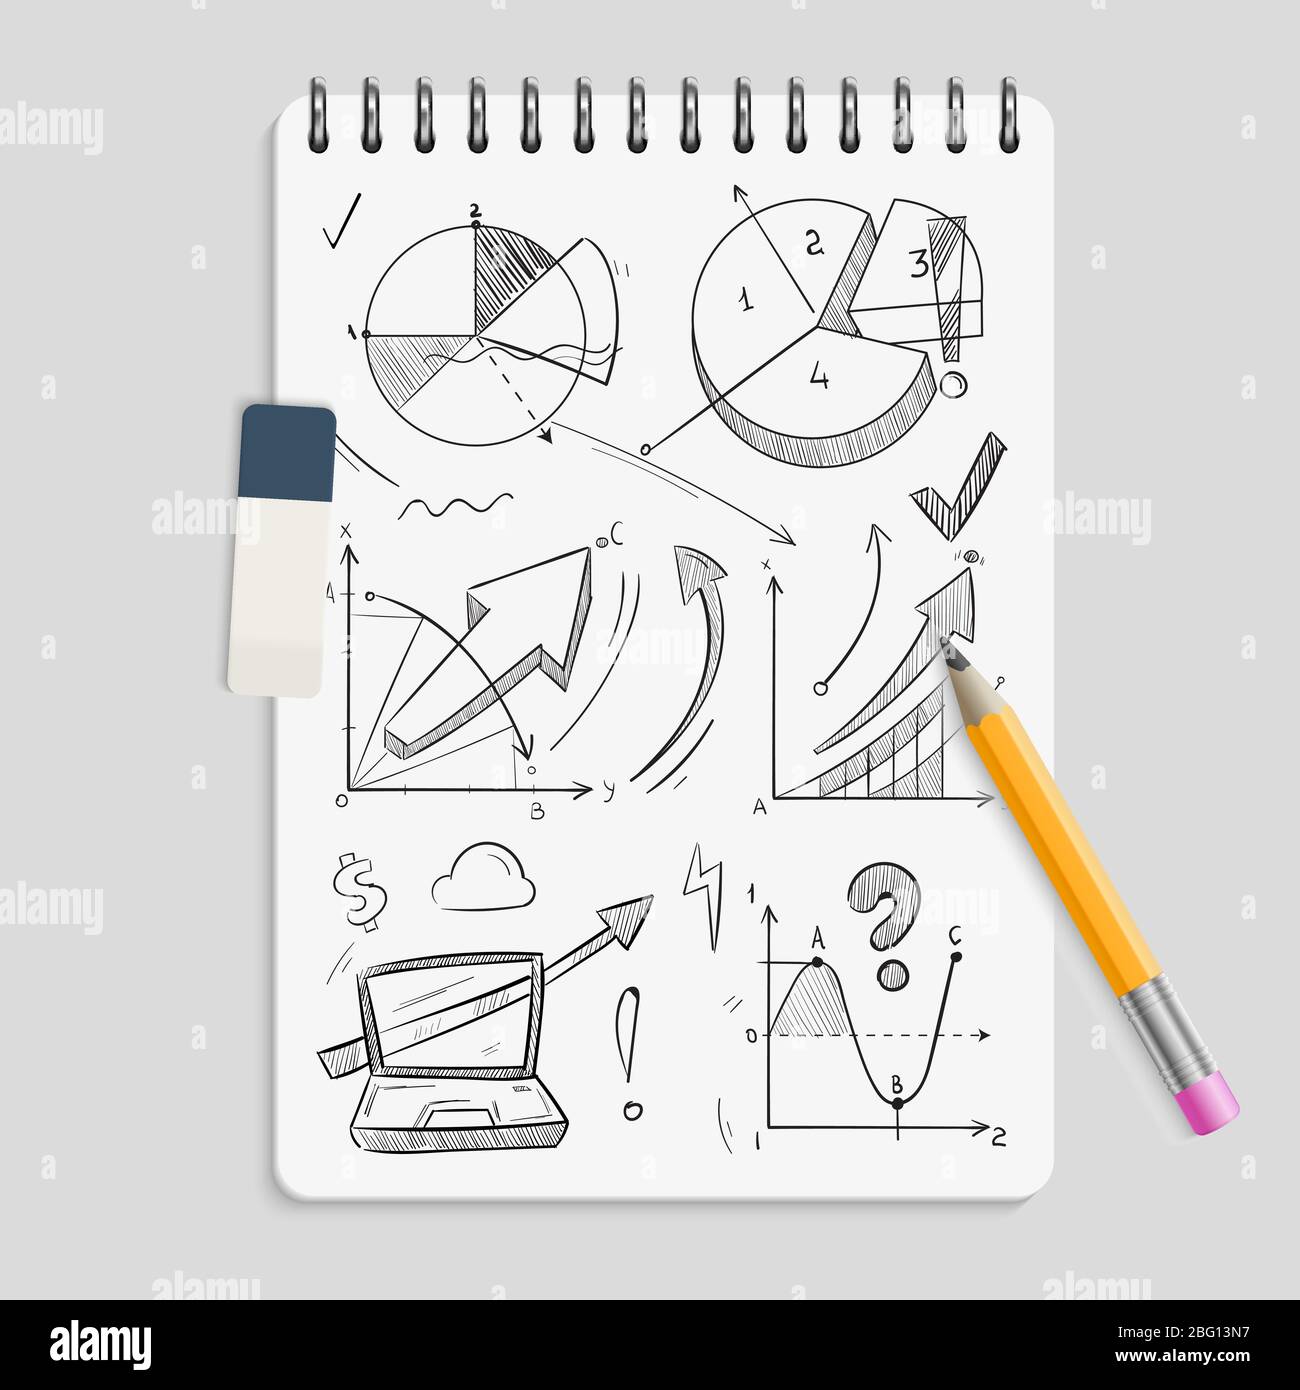 Business graphics pencil sketches on realistic notebook with eraser and pencil - brainstorm concept. Sketch business graphic doodle, pencil drawing diagram on notepad. Vector illustration Stock Vector